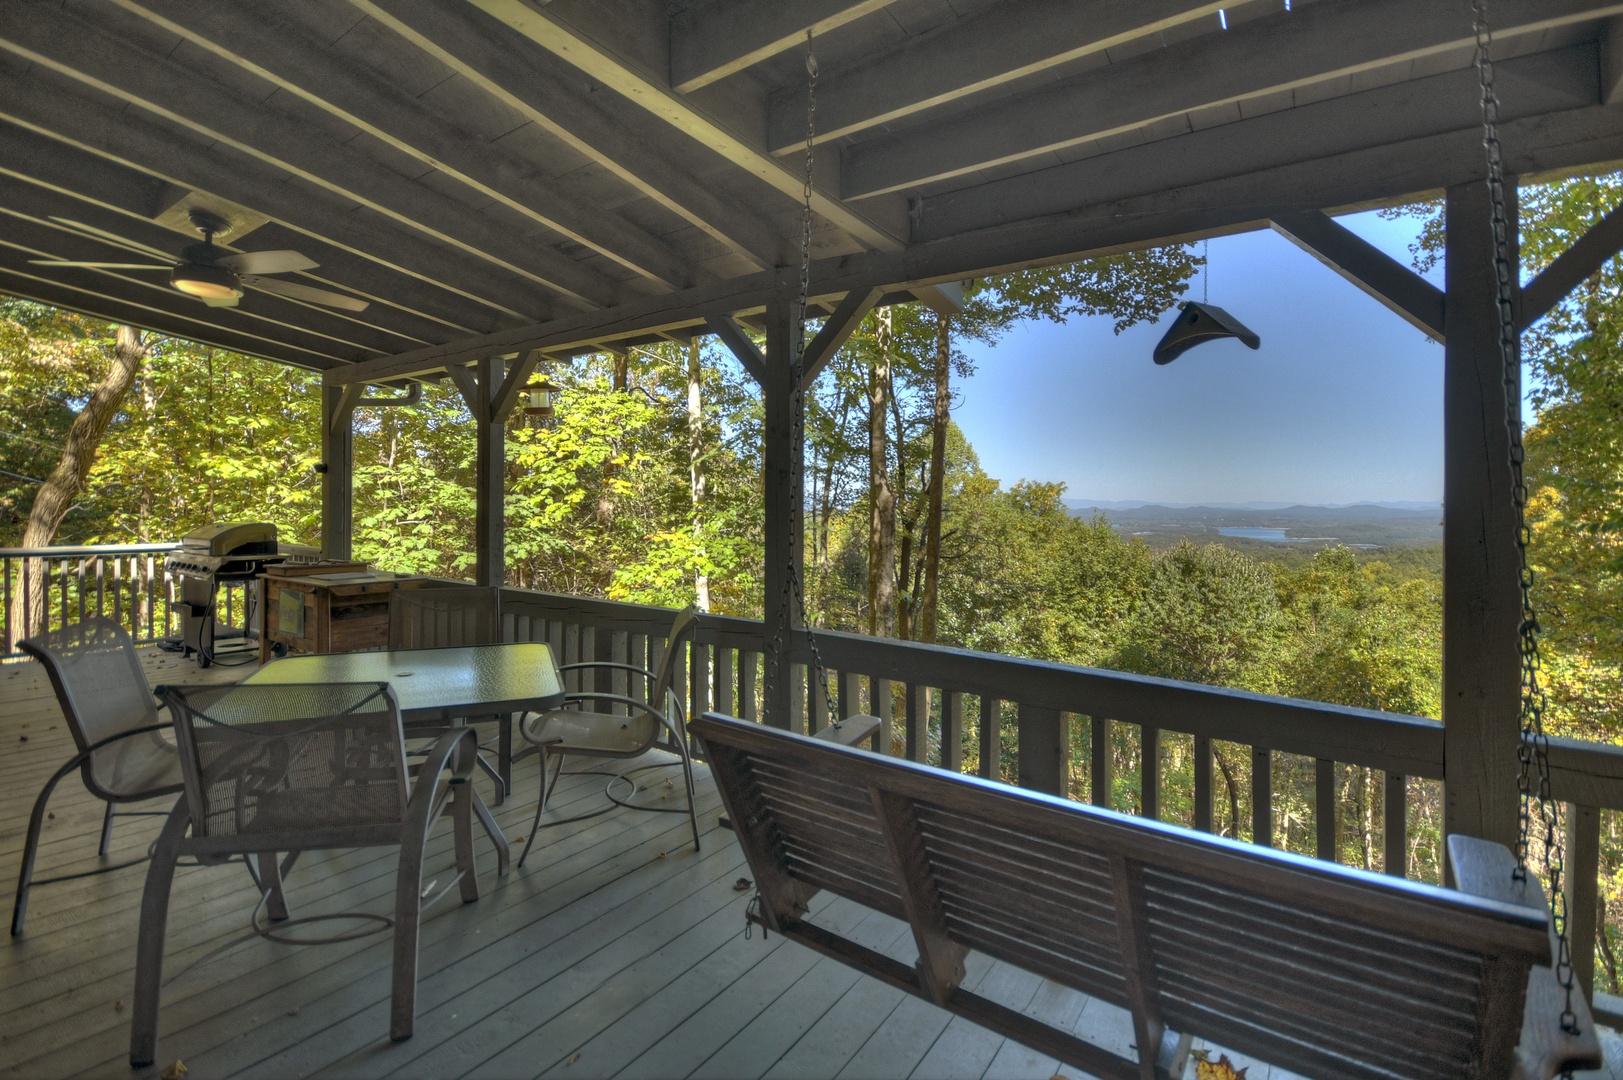 Ridgetop Pointaview- Entry level deck area with outdoor dining and a bench swing